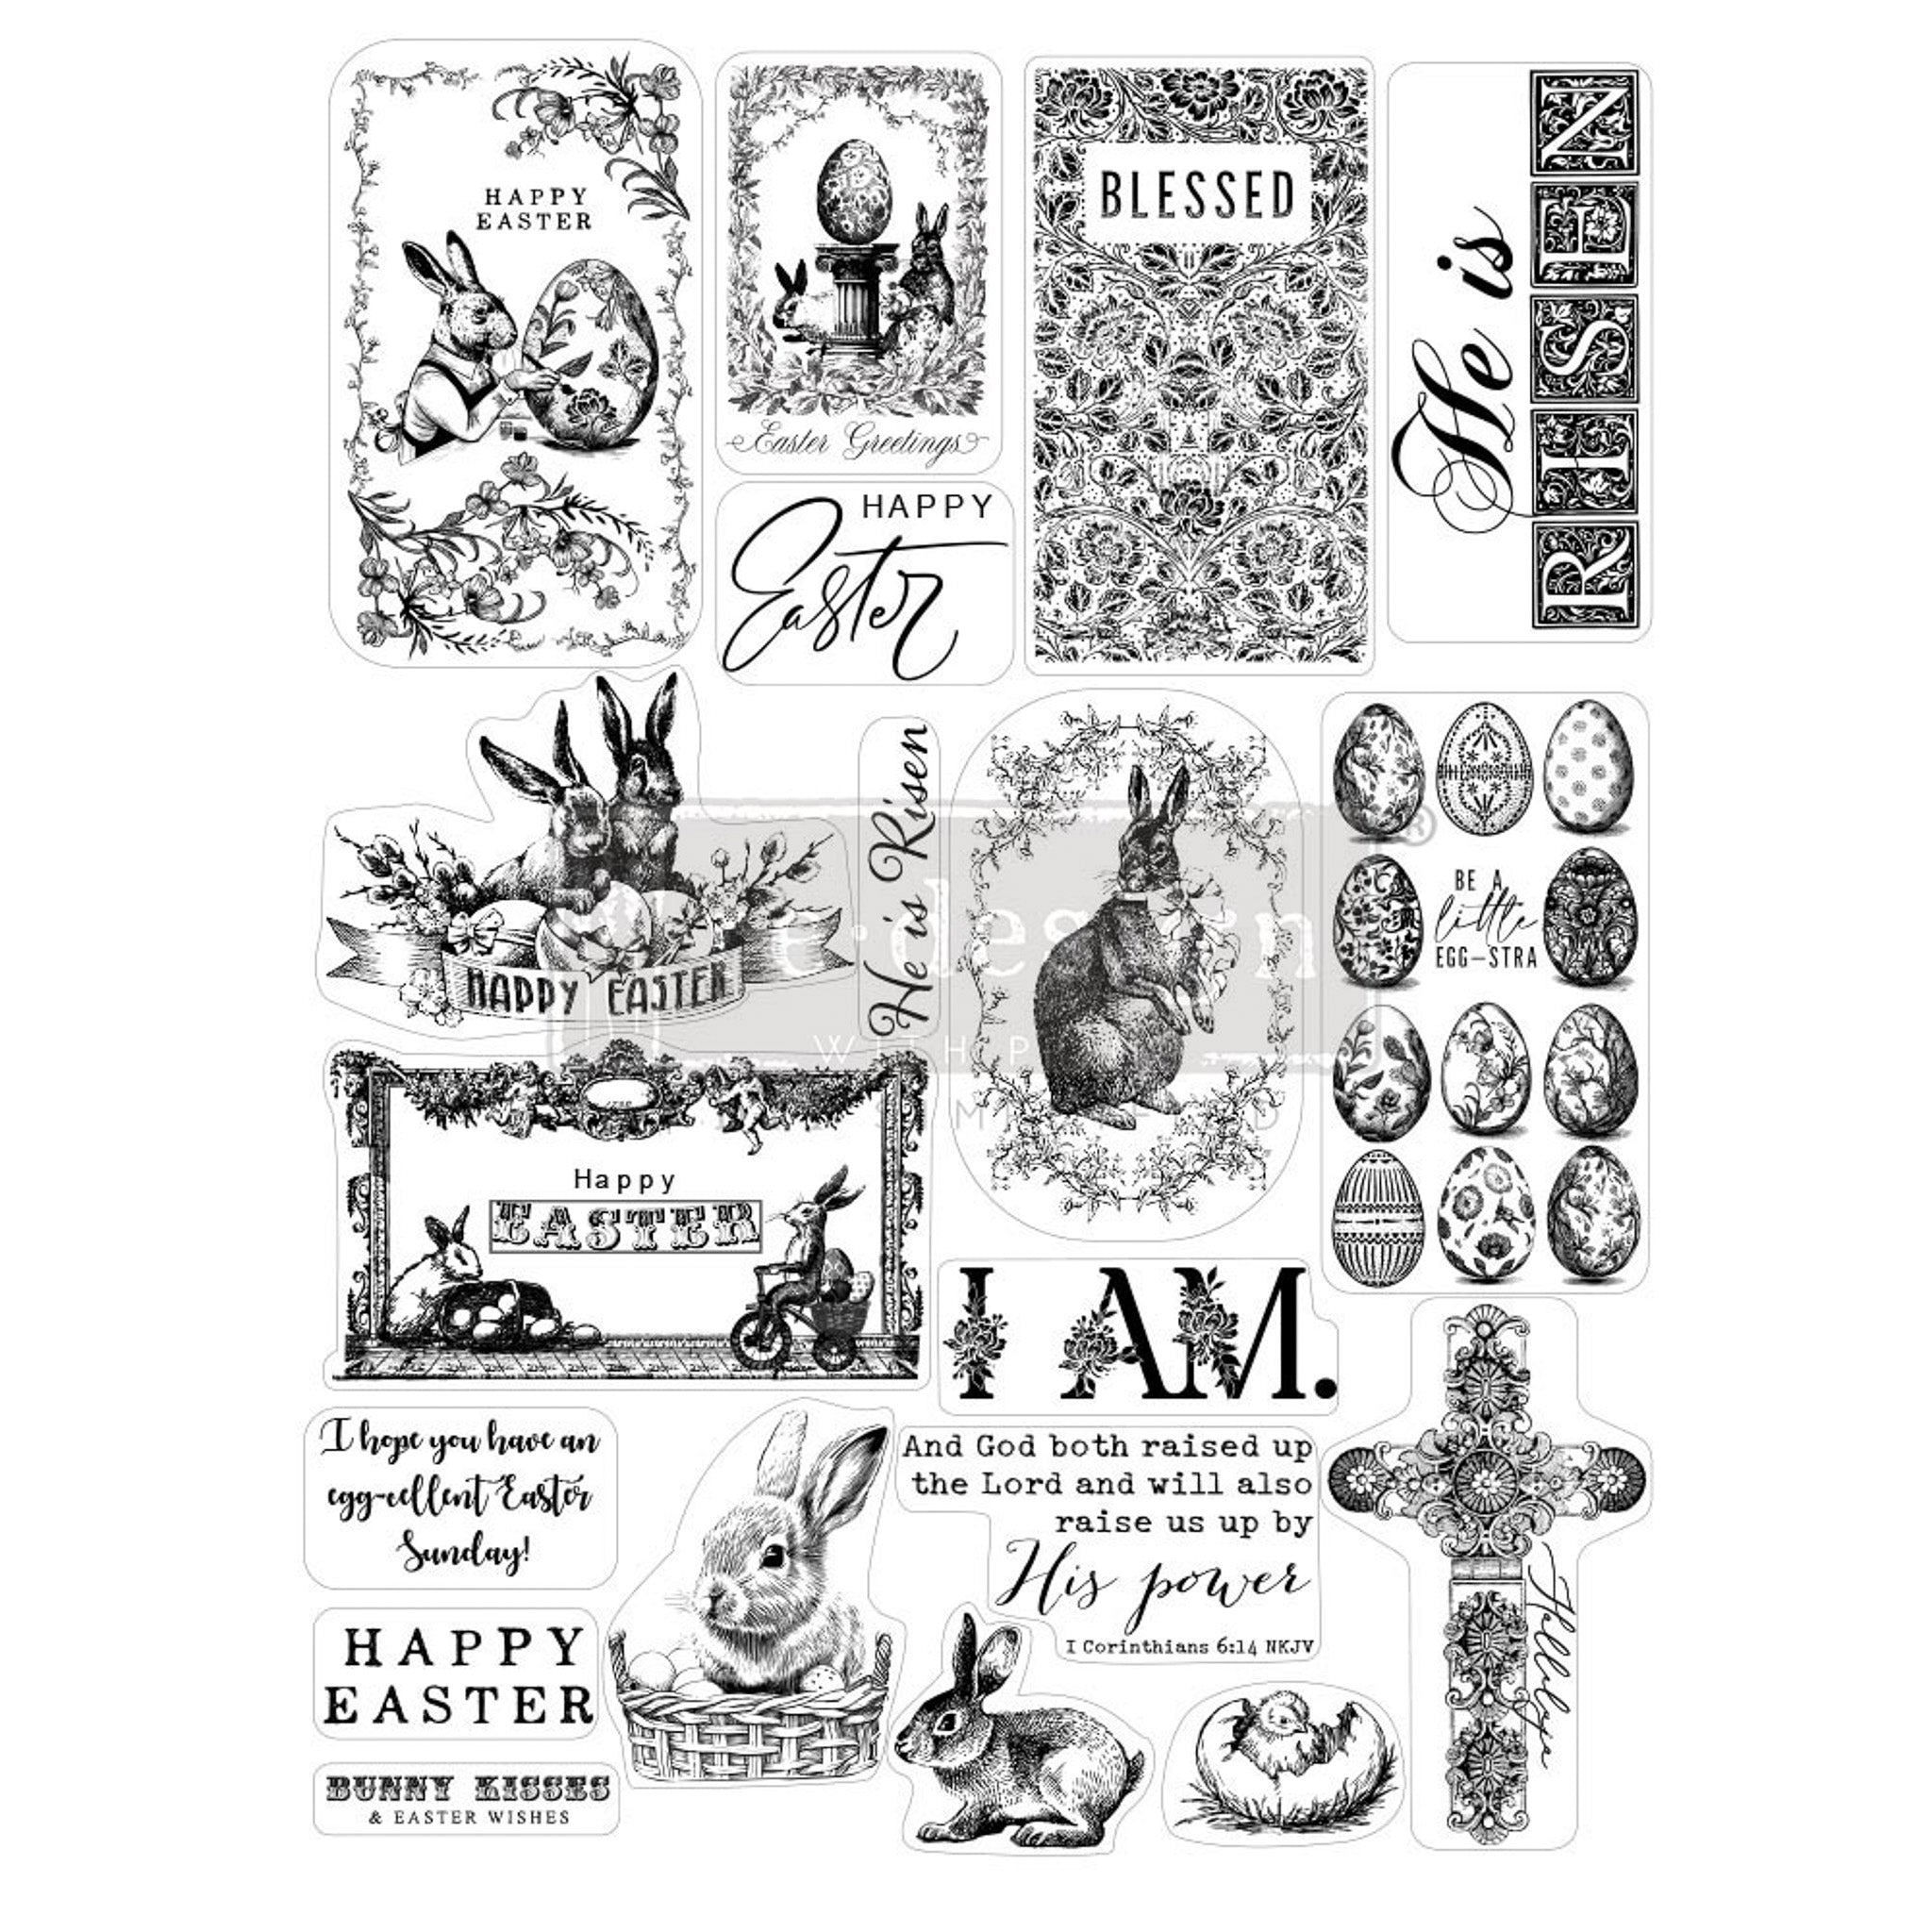 Eighteen rubber stamp designs of ReDesign with Prima's Easter Blessings that feature bunnies, eggs, crosses, and festive sayings are against a white background.